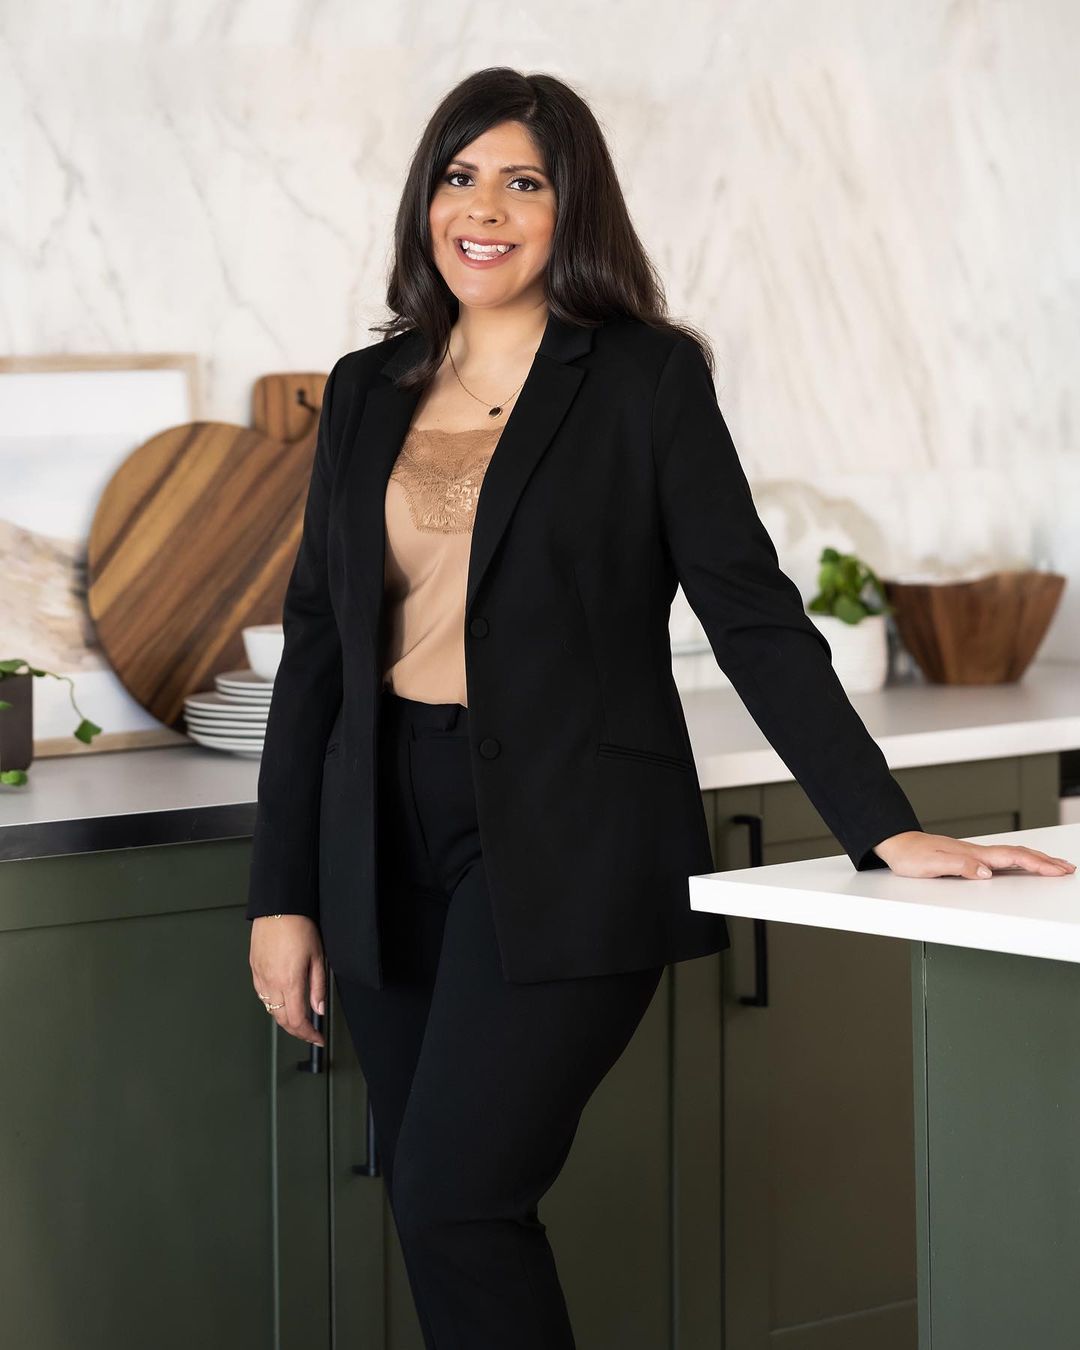 woman with black suit and golden brown top posing in the kitchen